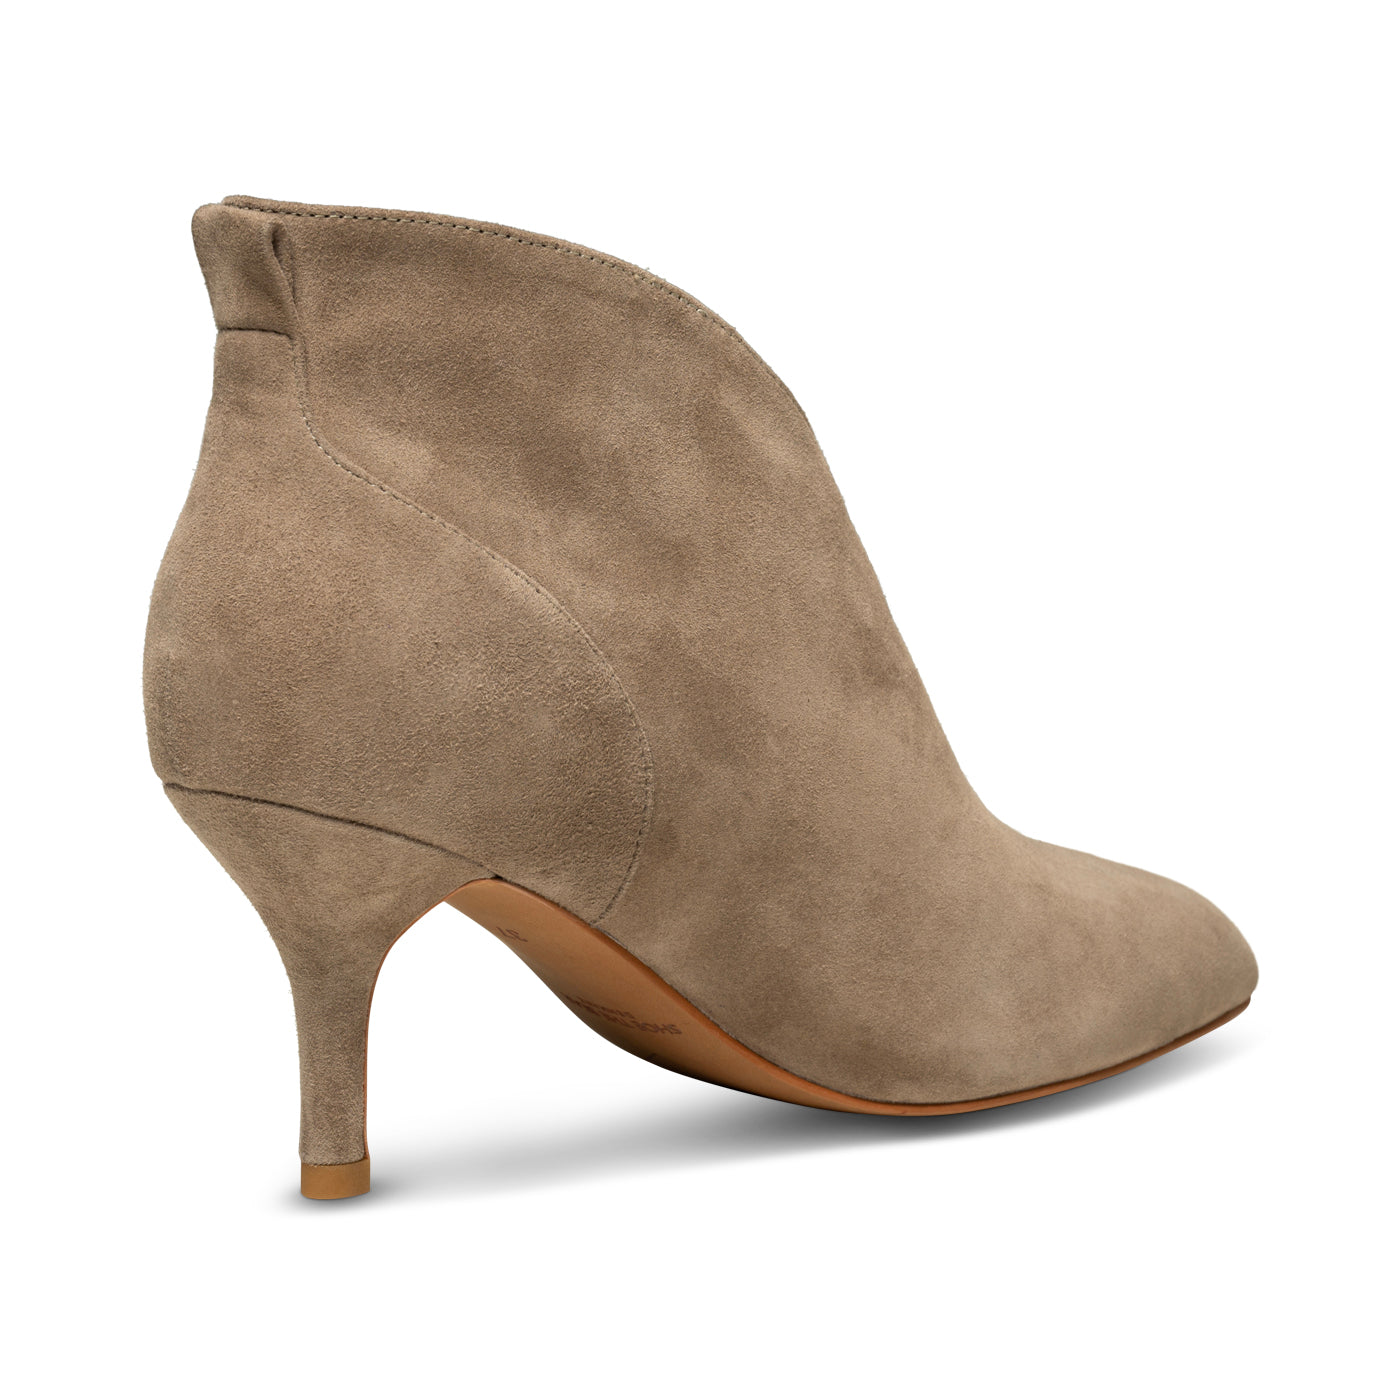 SHOE THE BEAR WOMENS Valentine hæl ruskind Heels 160 TAUPE